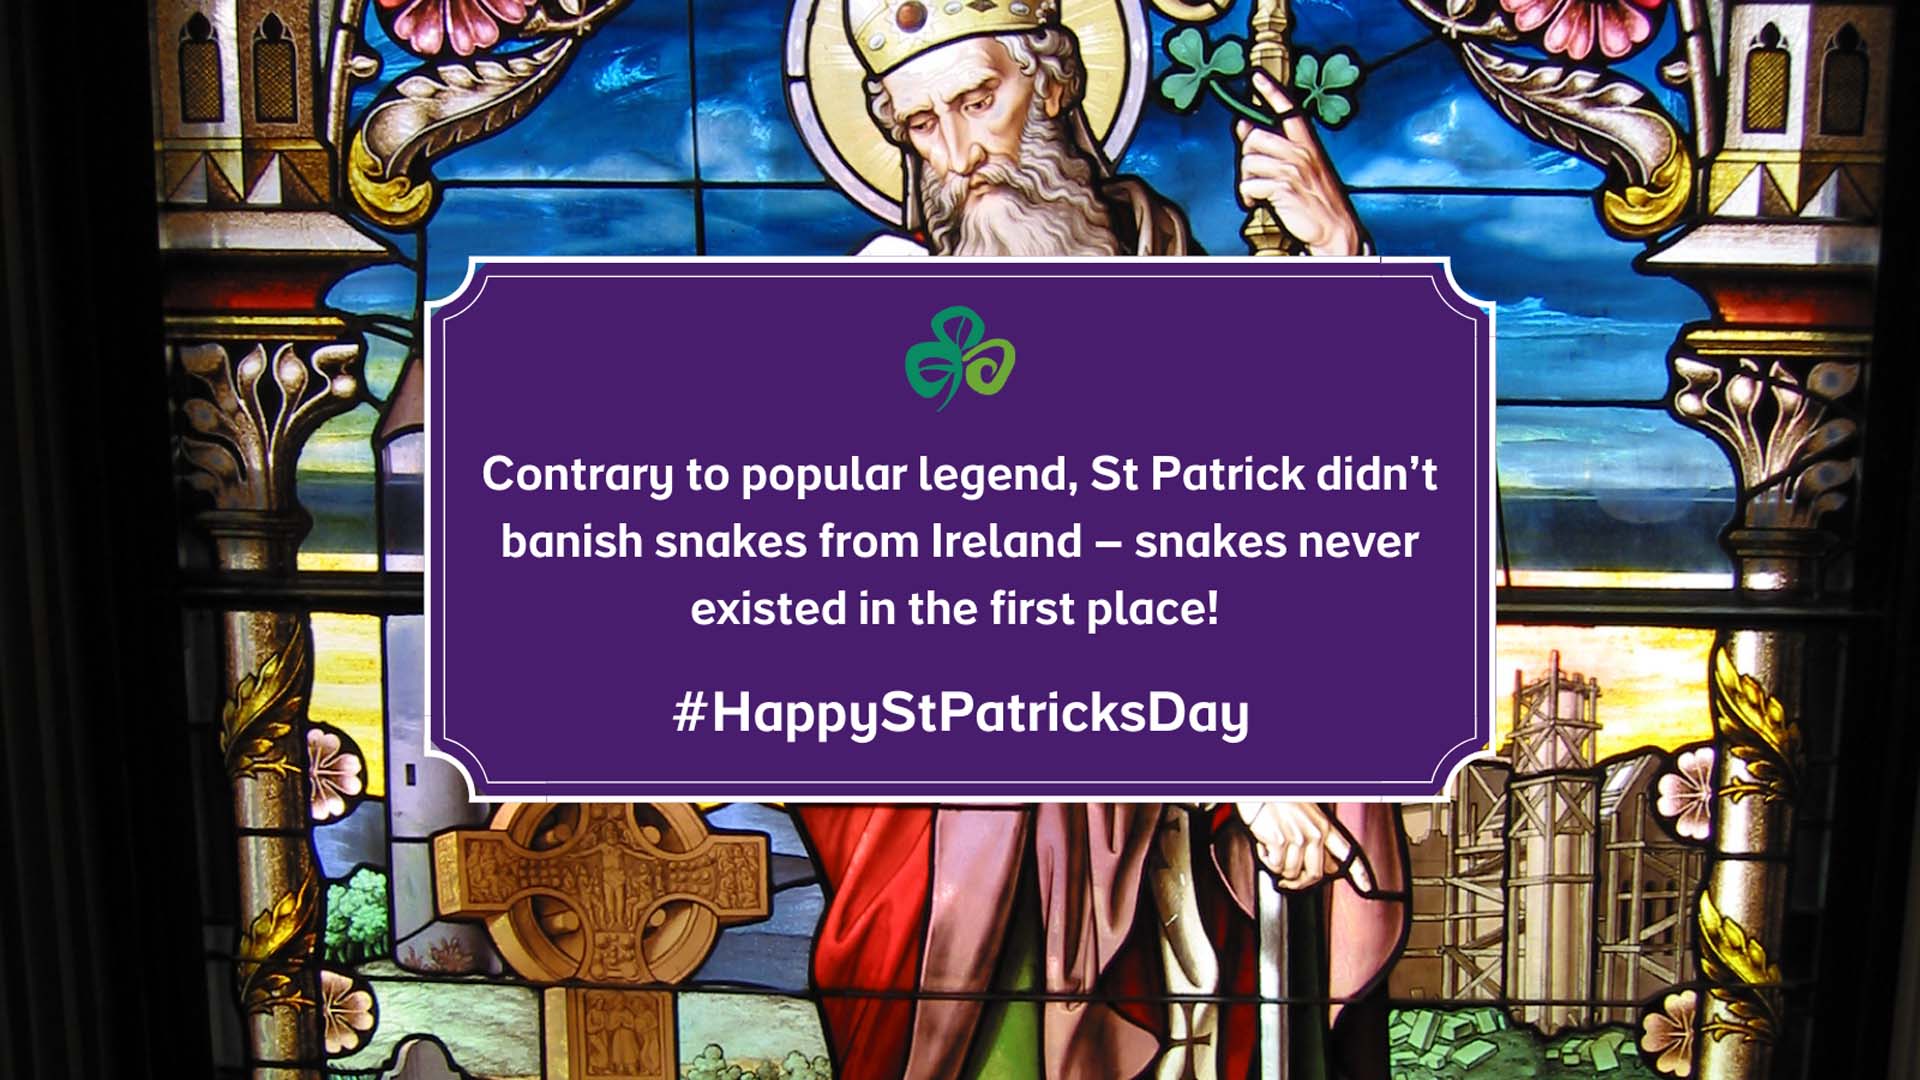 st patricks day facts about the snake 